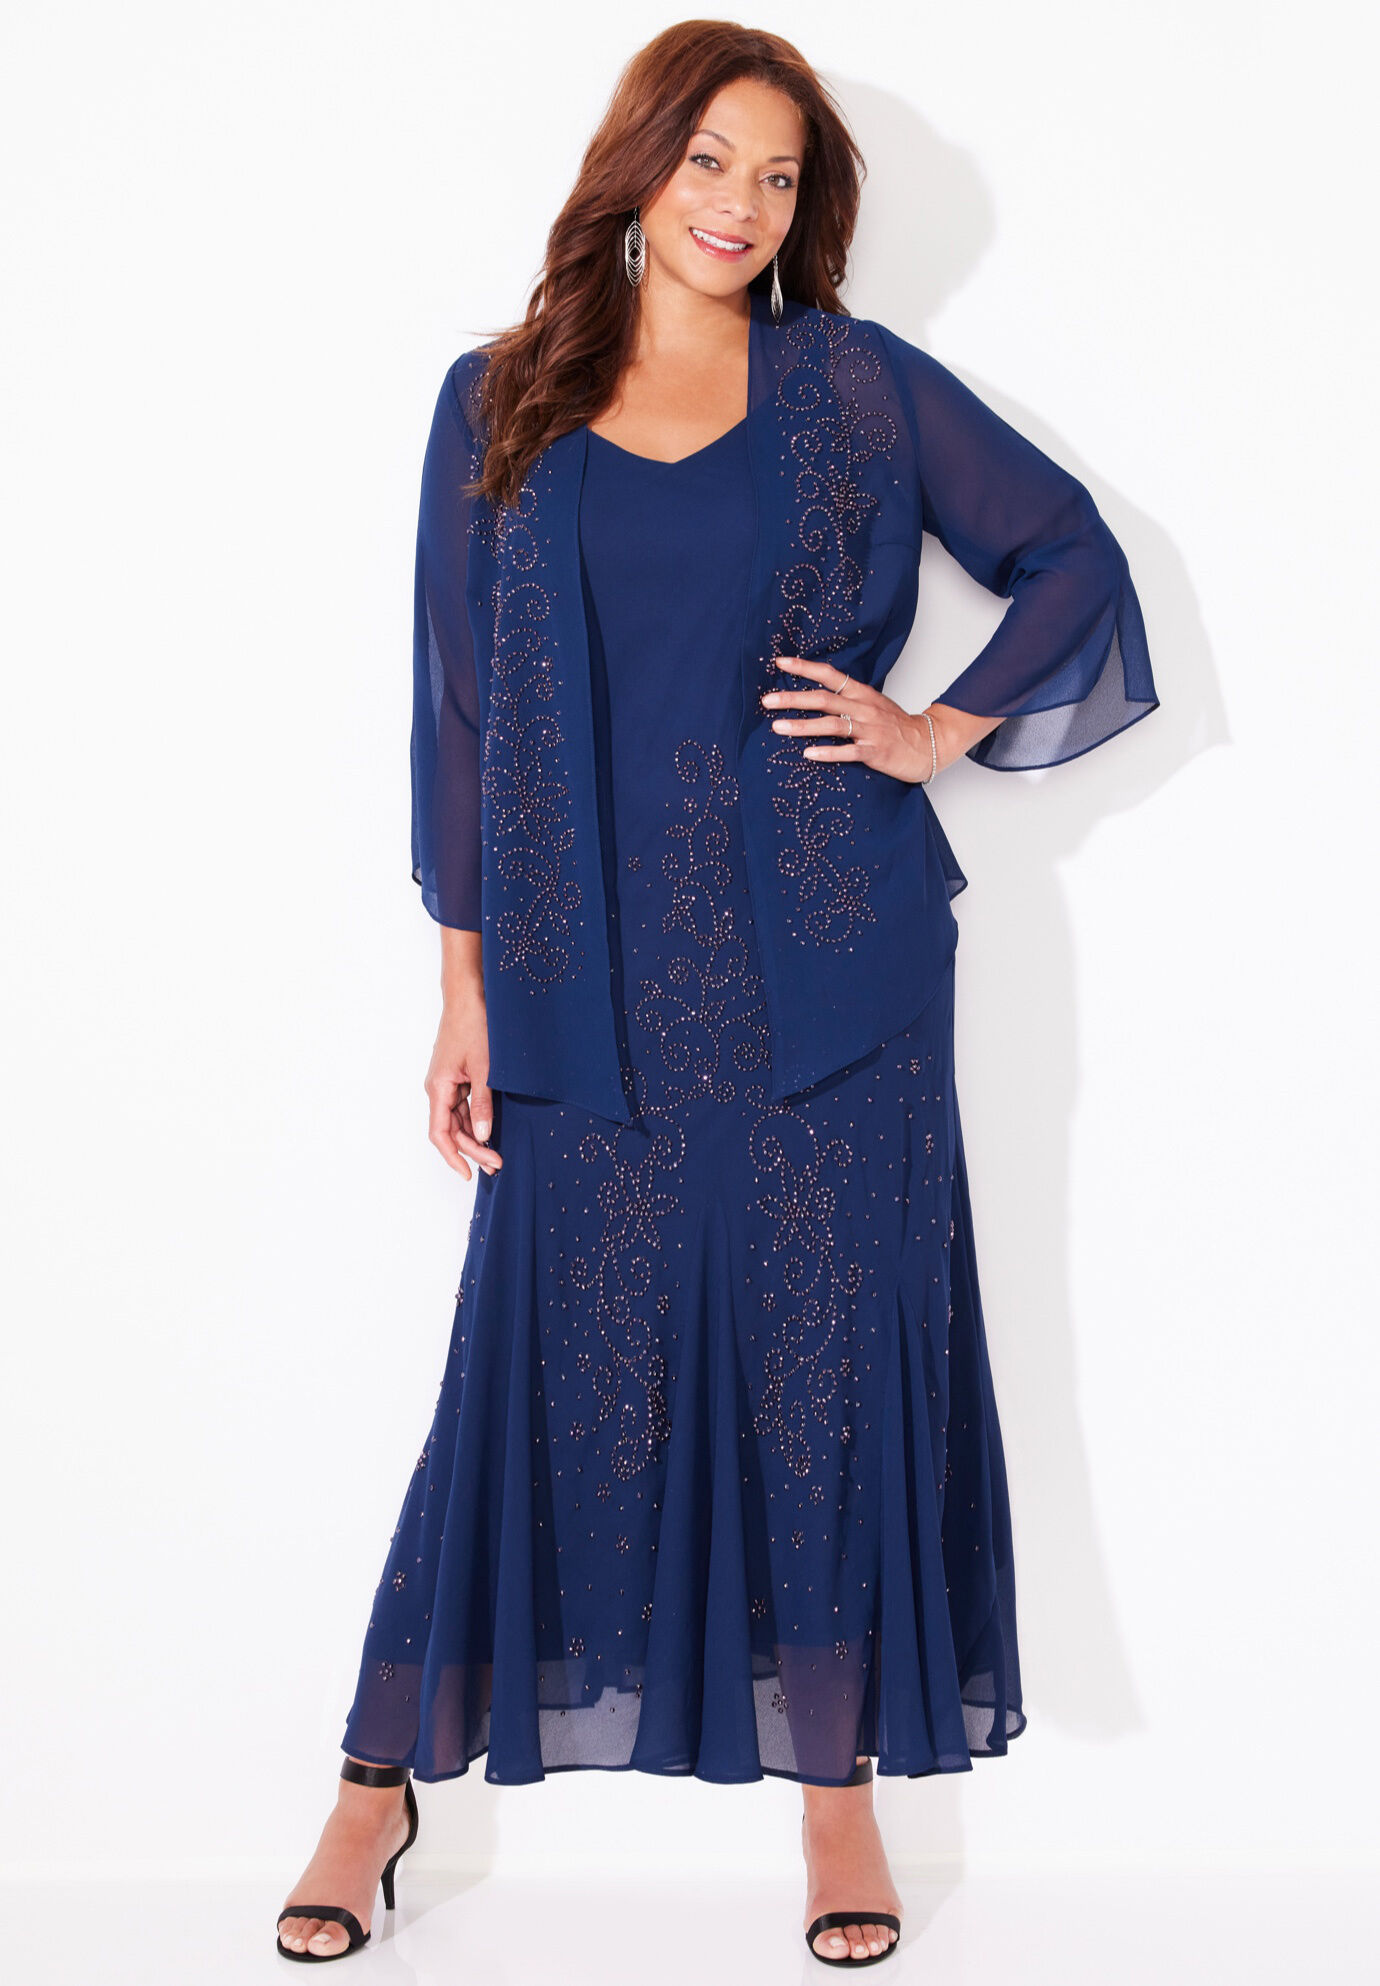 Catherines Mother Of The Bride Plus Size Dresses Clearance ...